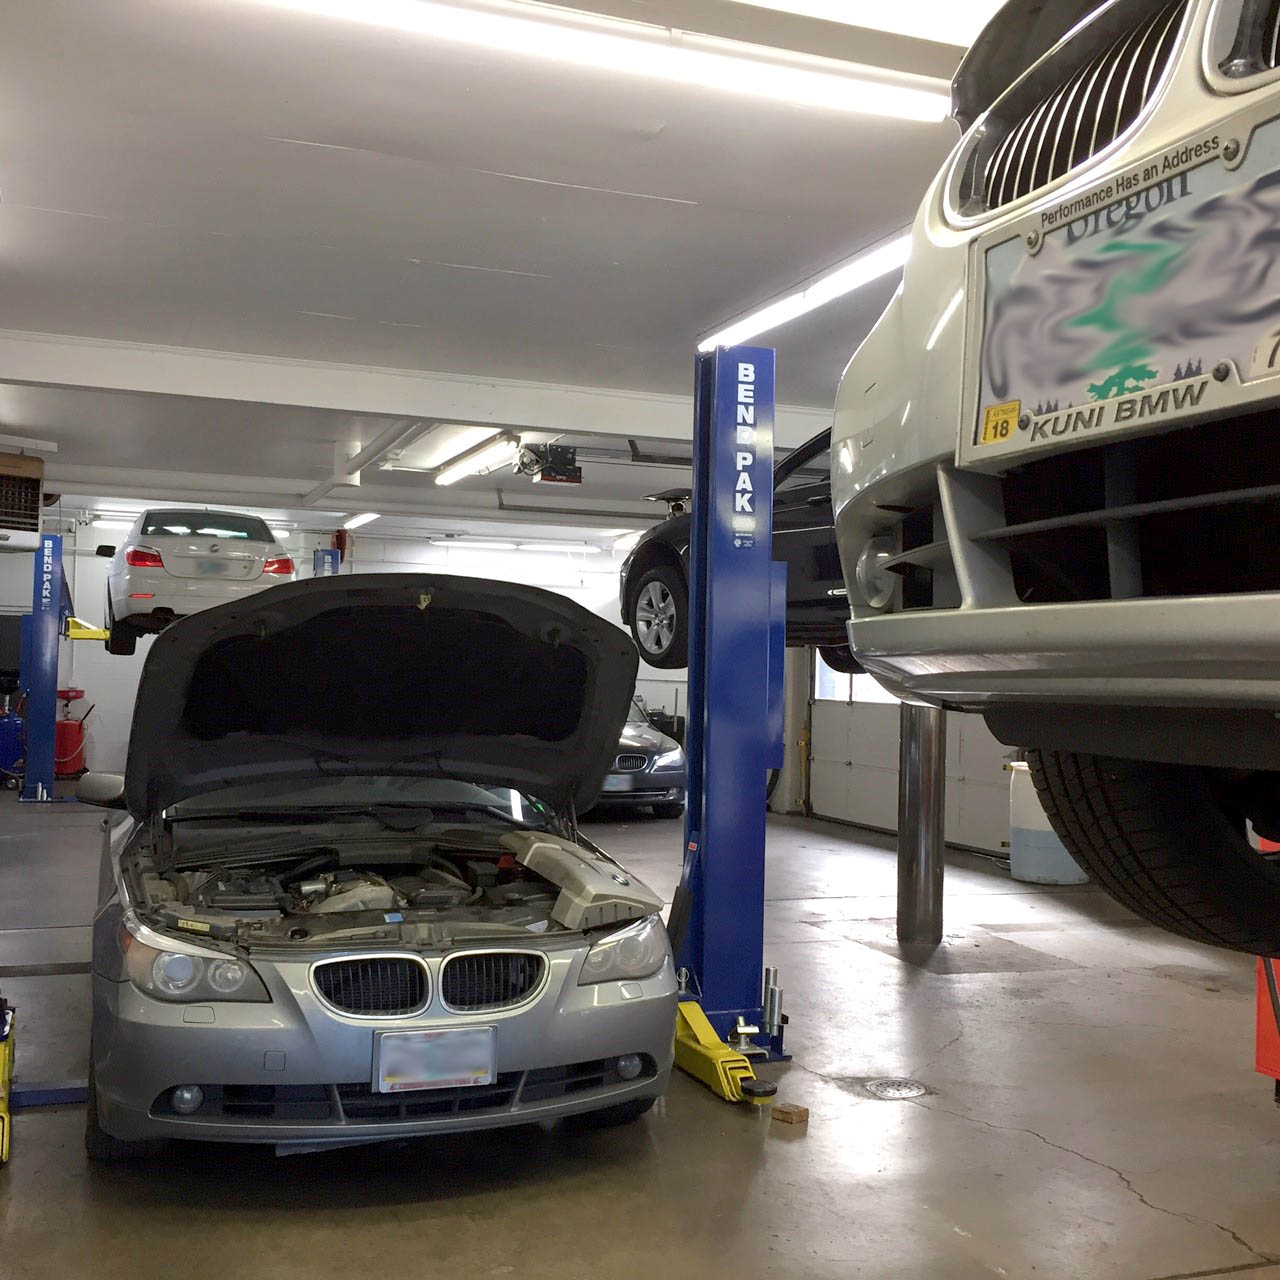 BMW's in for service